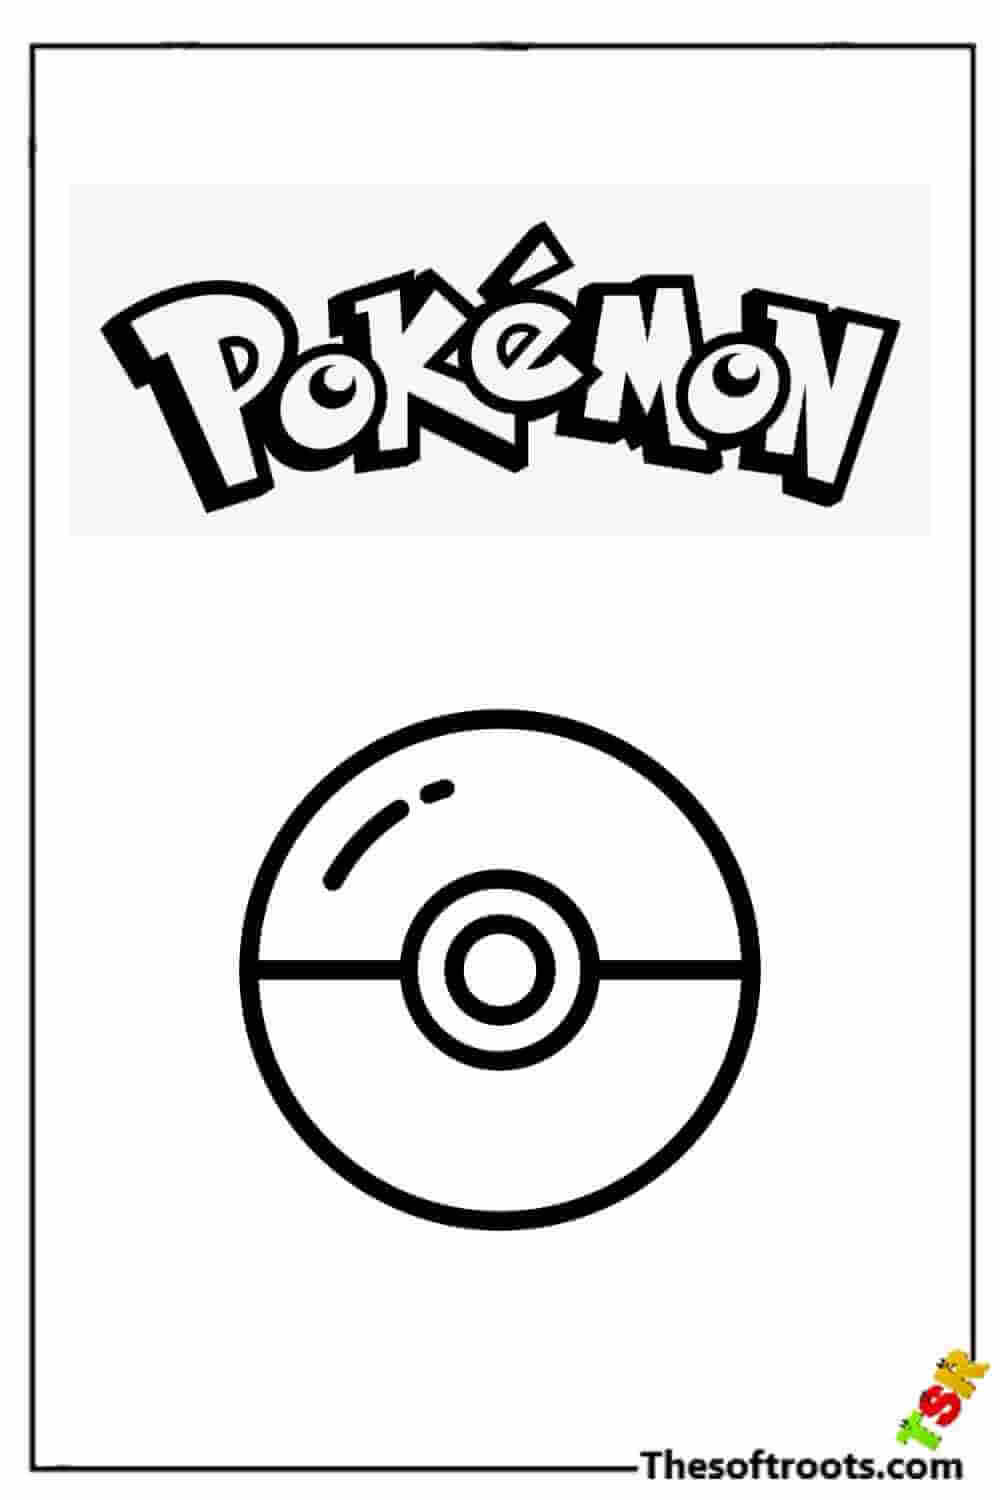 Pokémon Ball coloring pages